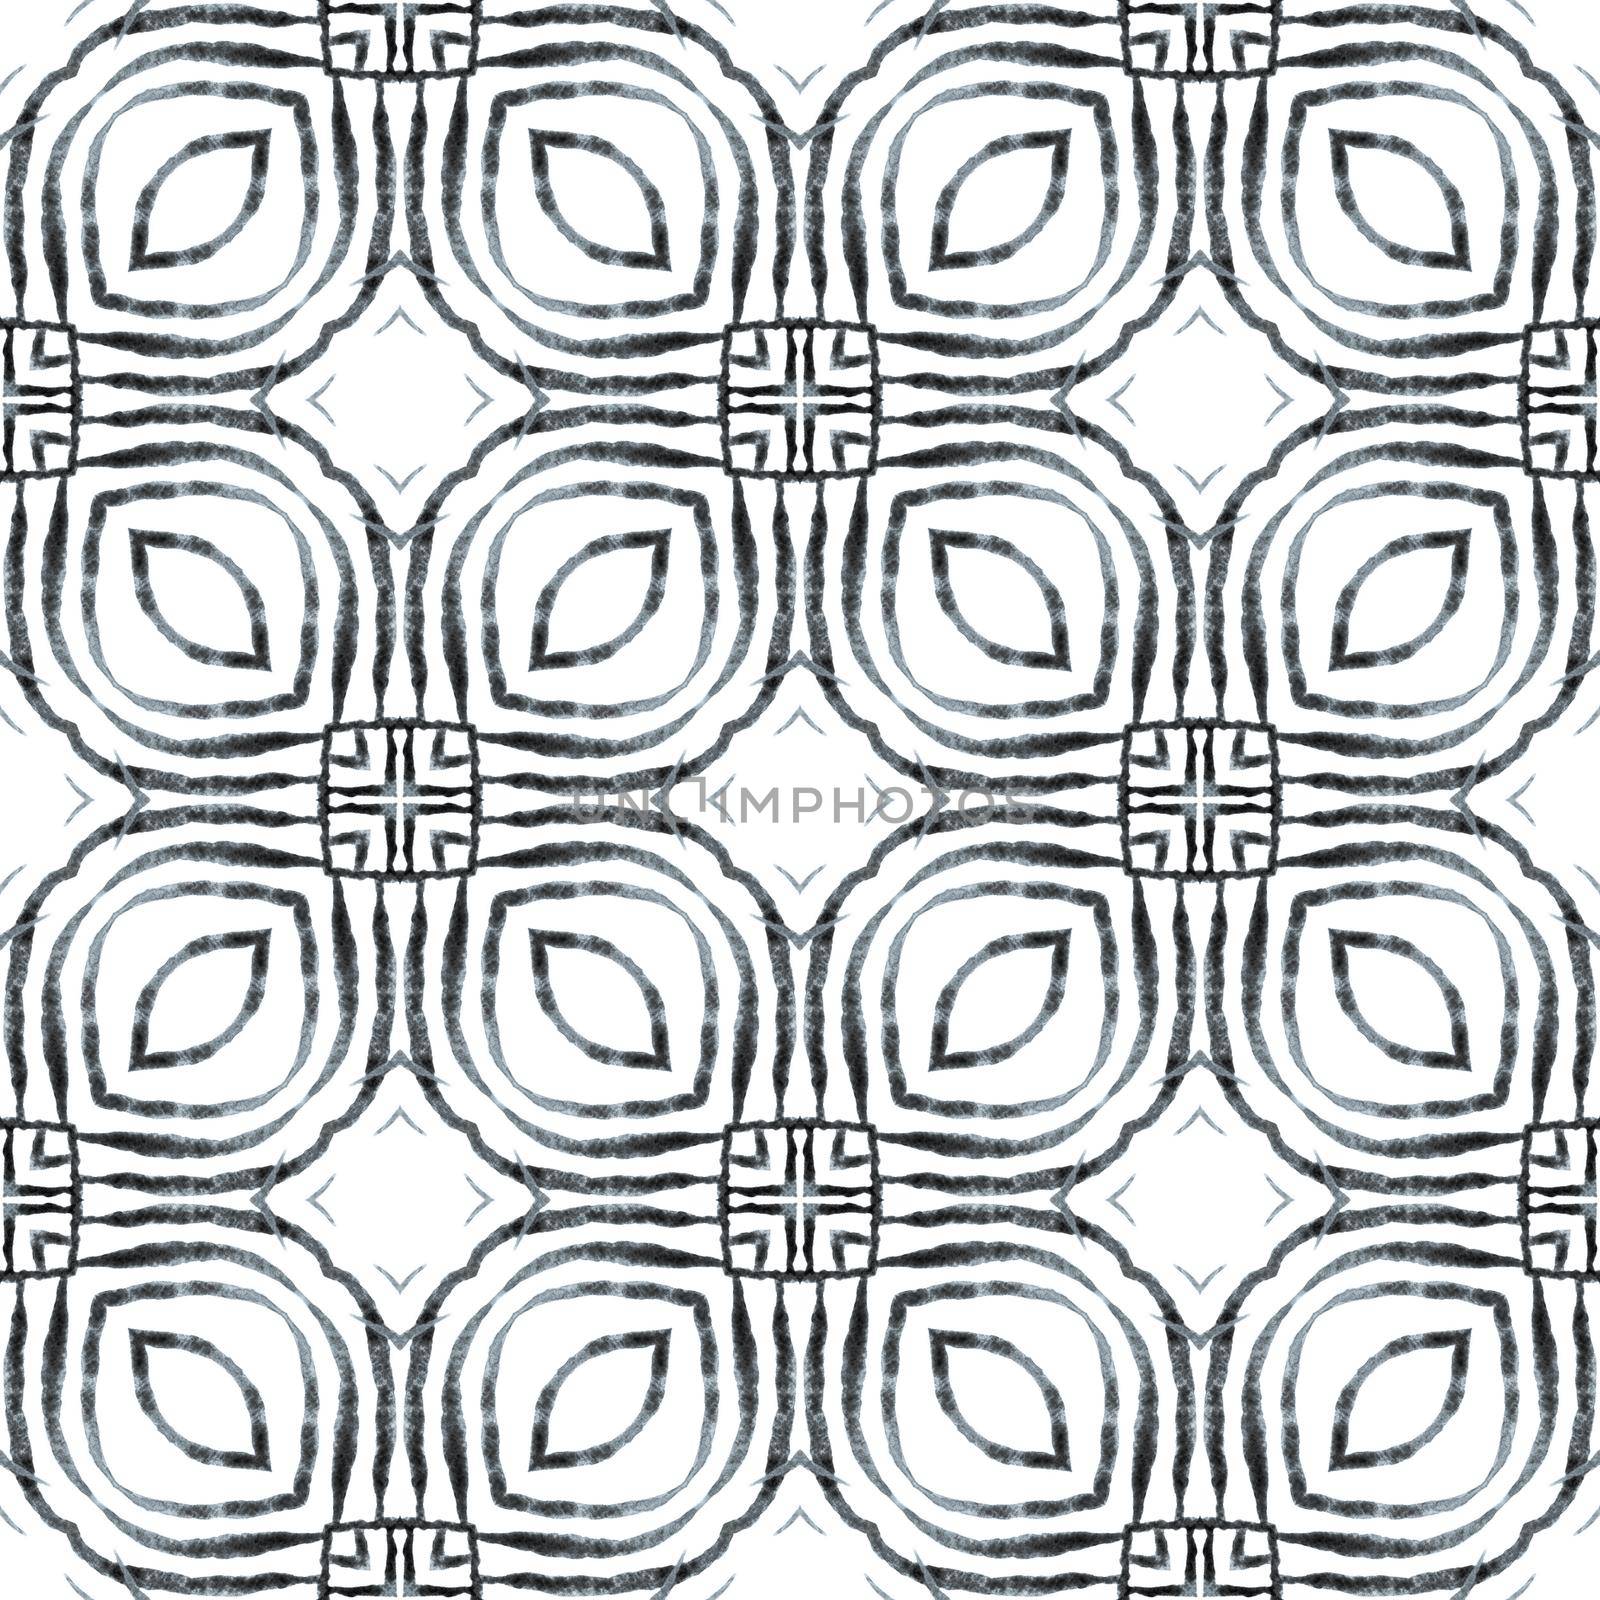 Hand painted tiled watercolor border. Black and white likable boho chic summer design. Tiled watercolor background. Textile ready awesome print, swimwear fabric, wallpaper, wrapping.